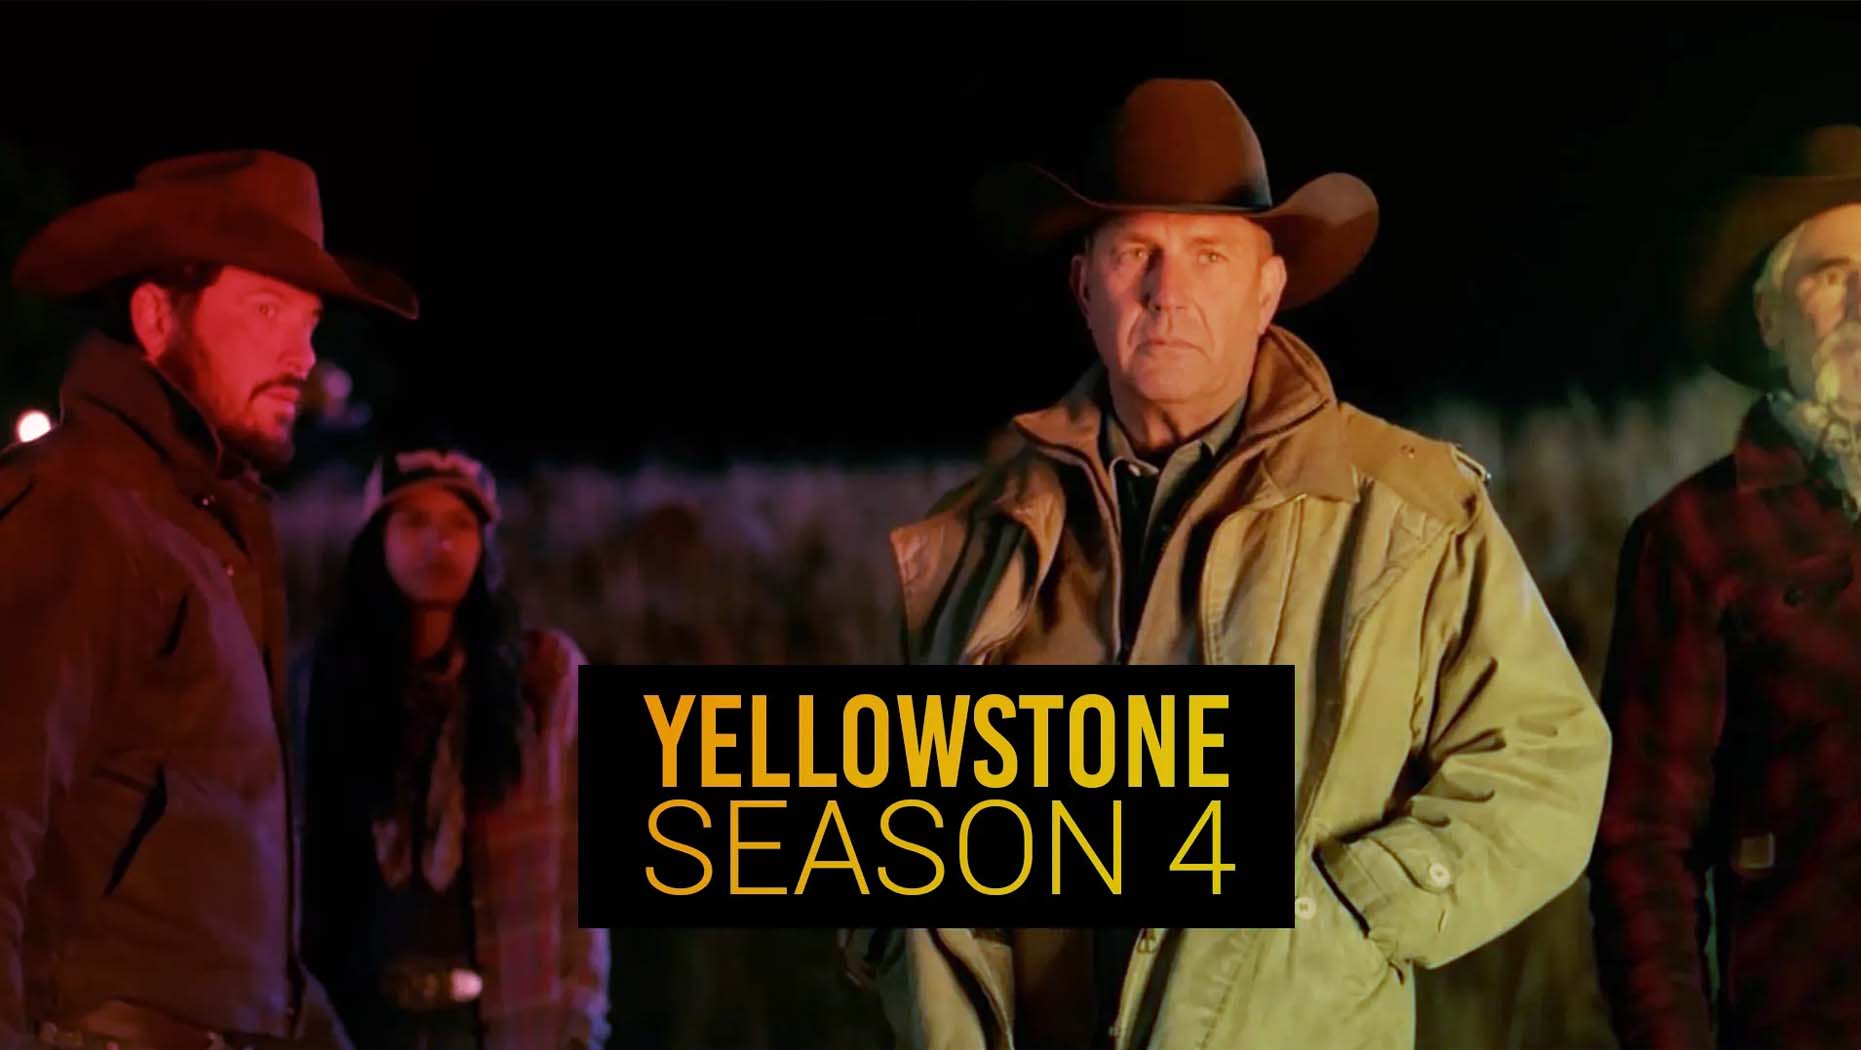 Yellowstone Season 4 Full Trailer for is Released Before the 2-Hour Premiere!